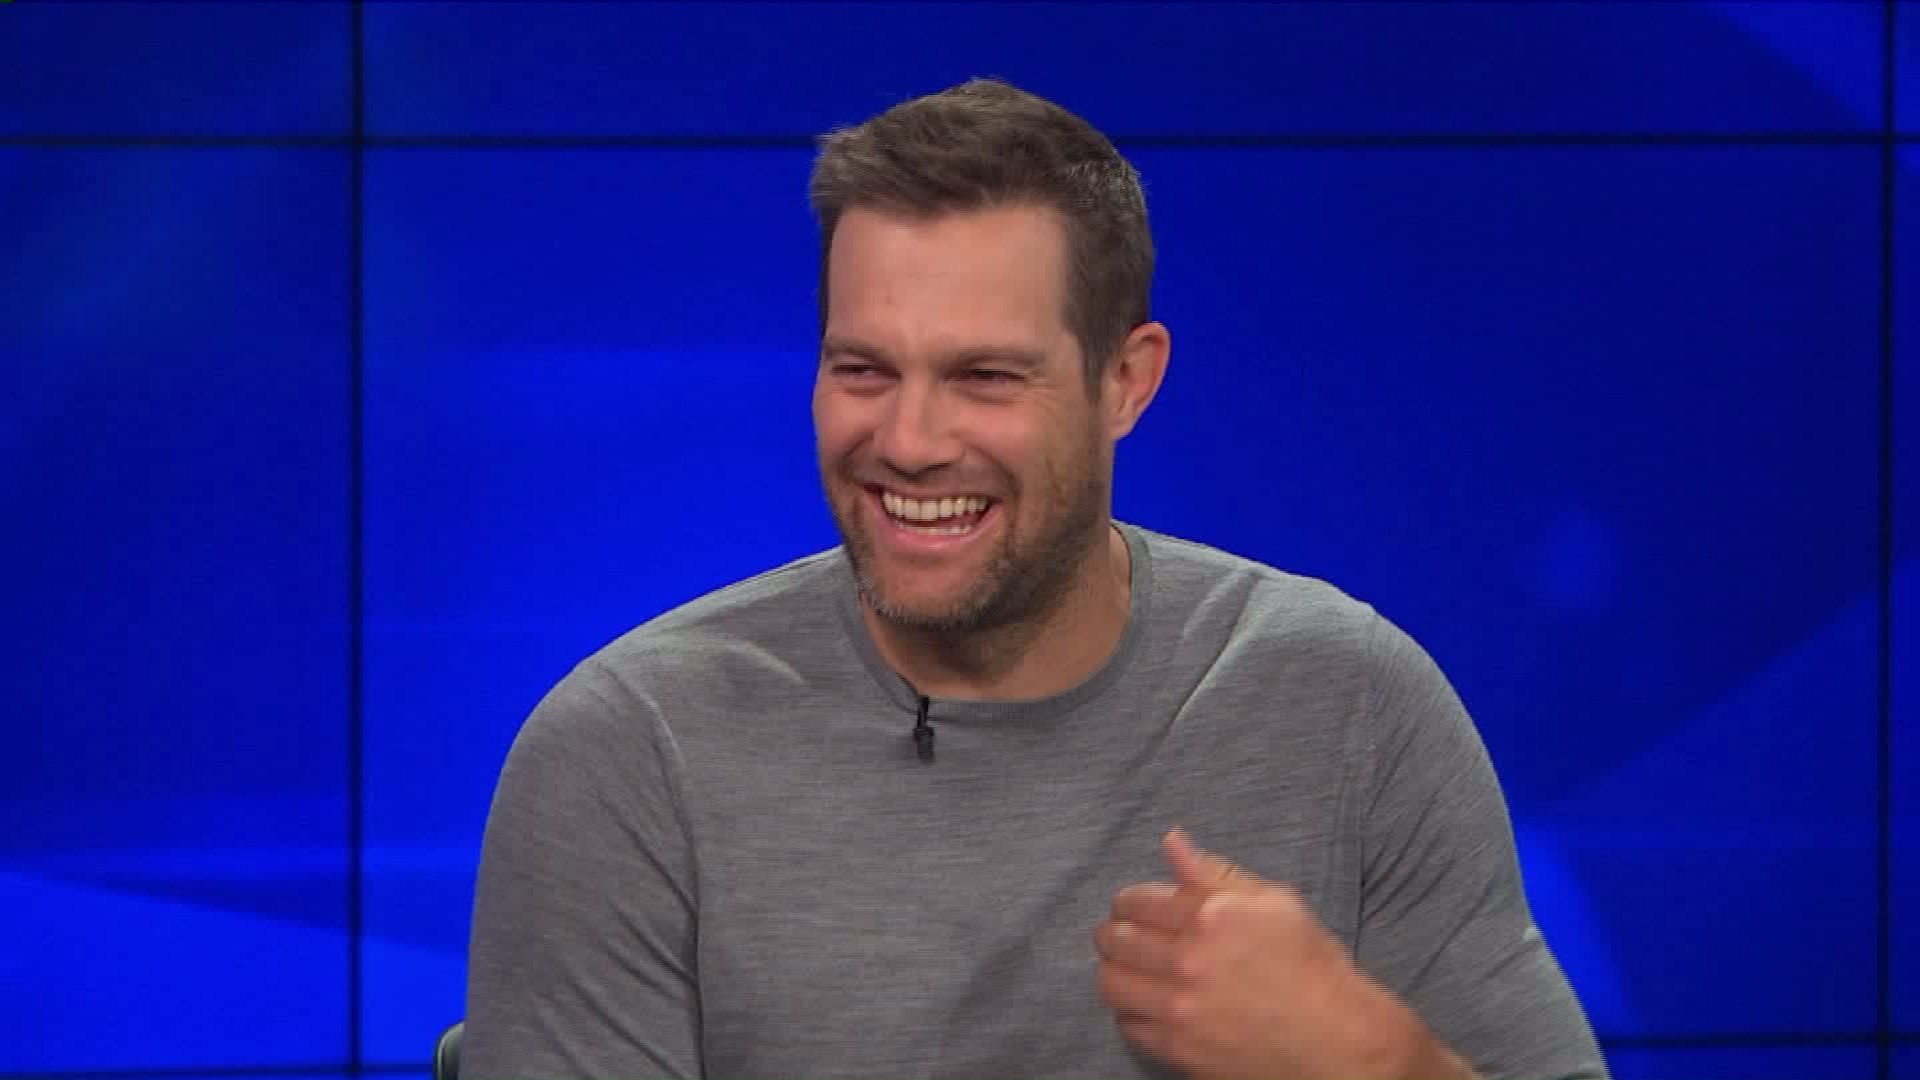 Geoff Stults Opens Up About What It Was Like Working With Katherine Heigl in Such an Intense Role For “Unforgettable”